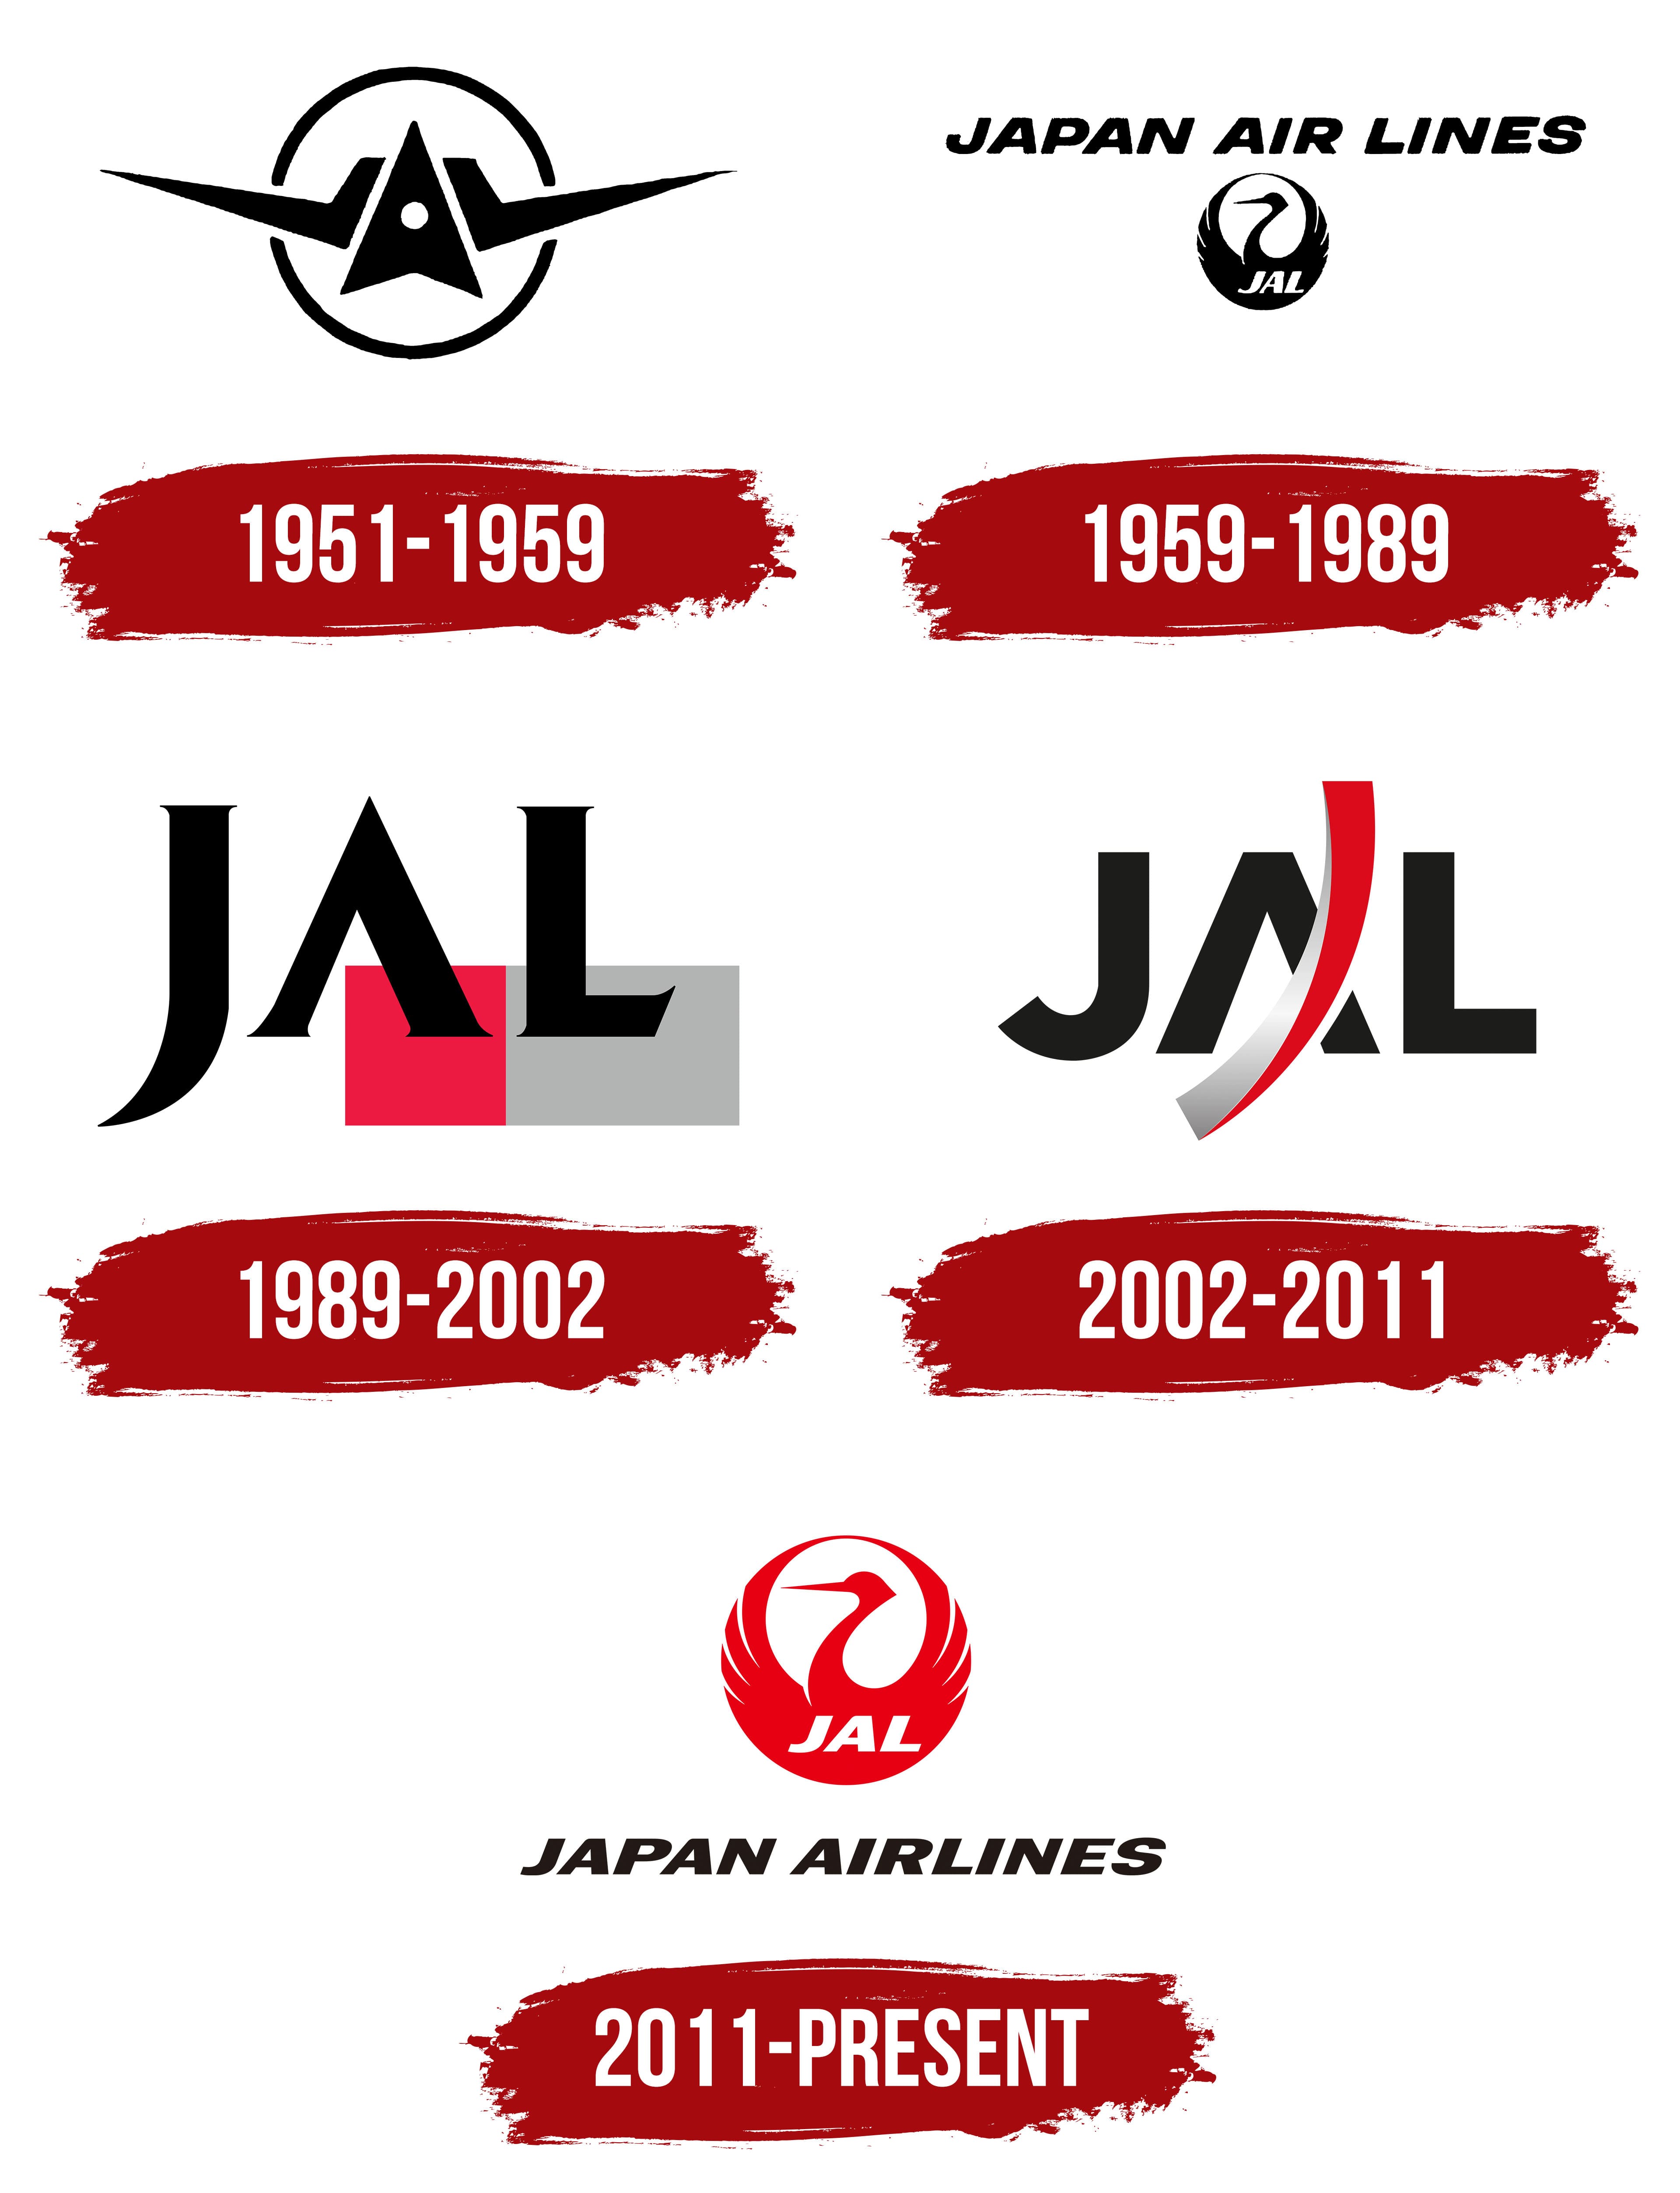 Japan Airlines - Wikipedia